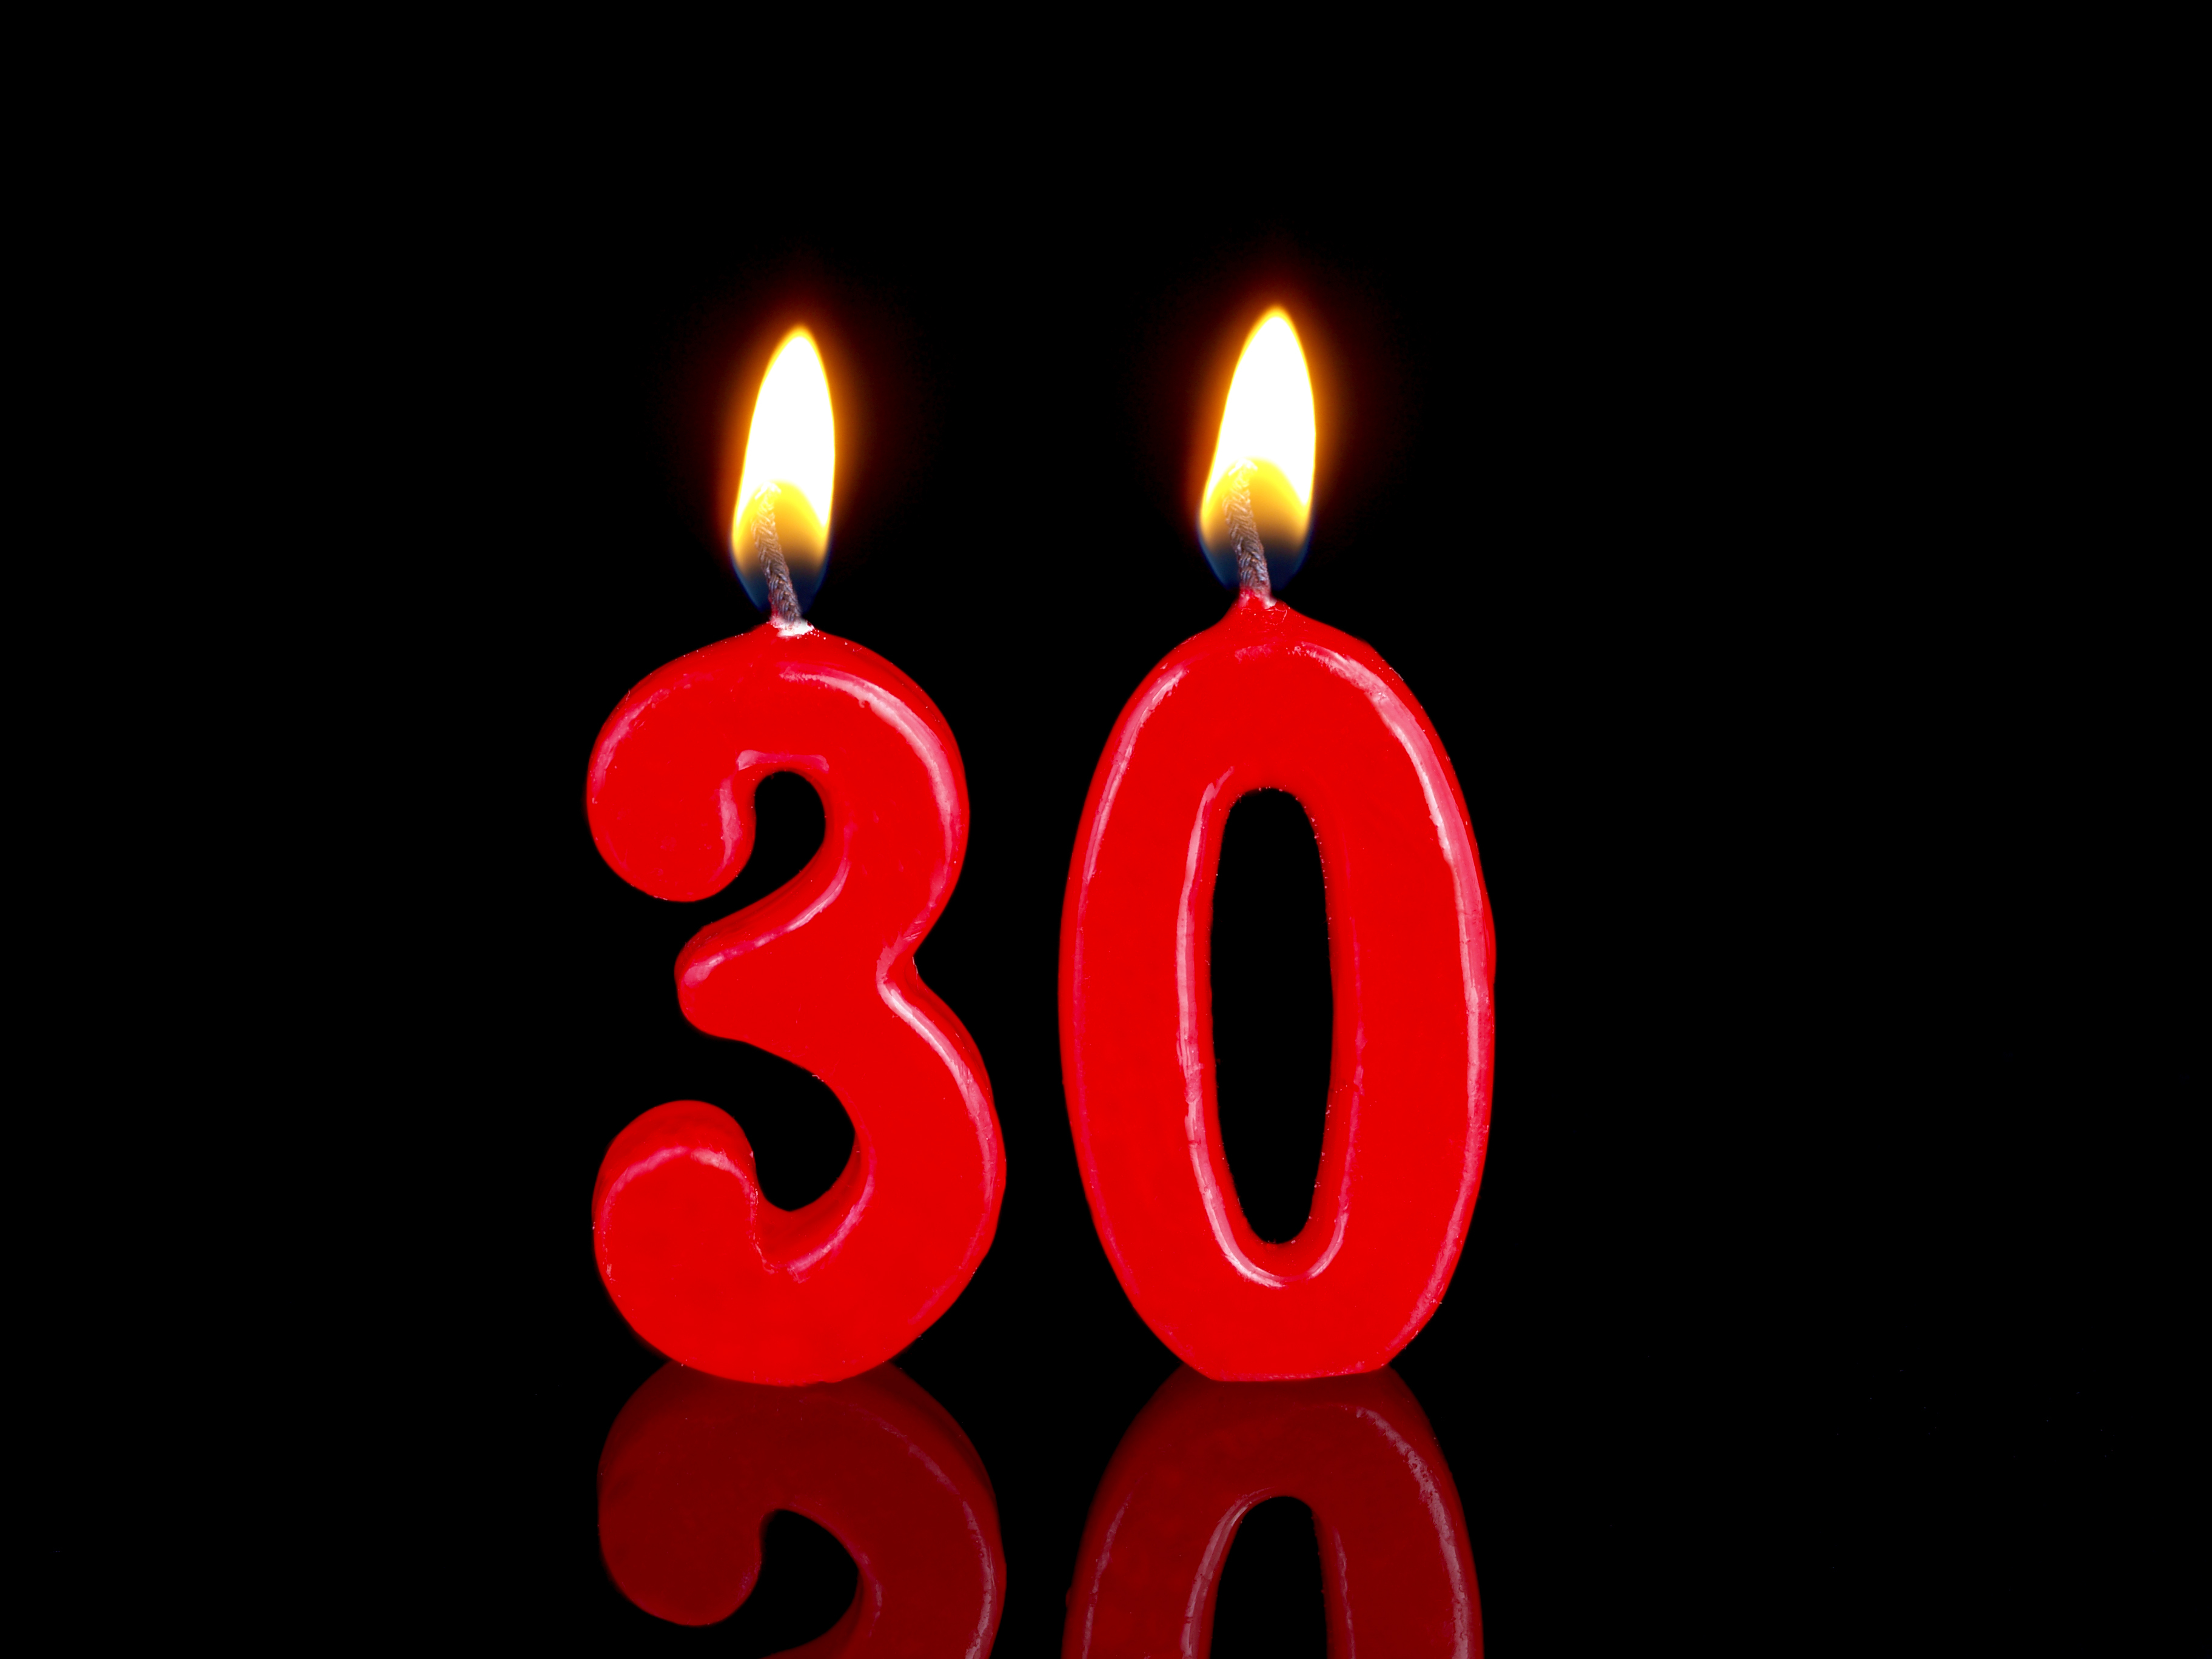 30 wallpaper,candle,lighting,birthday candle,text,number